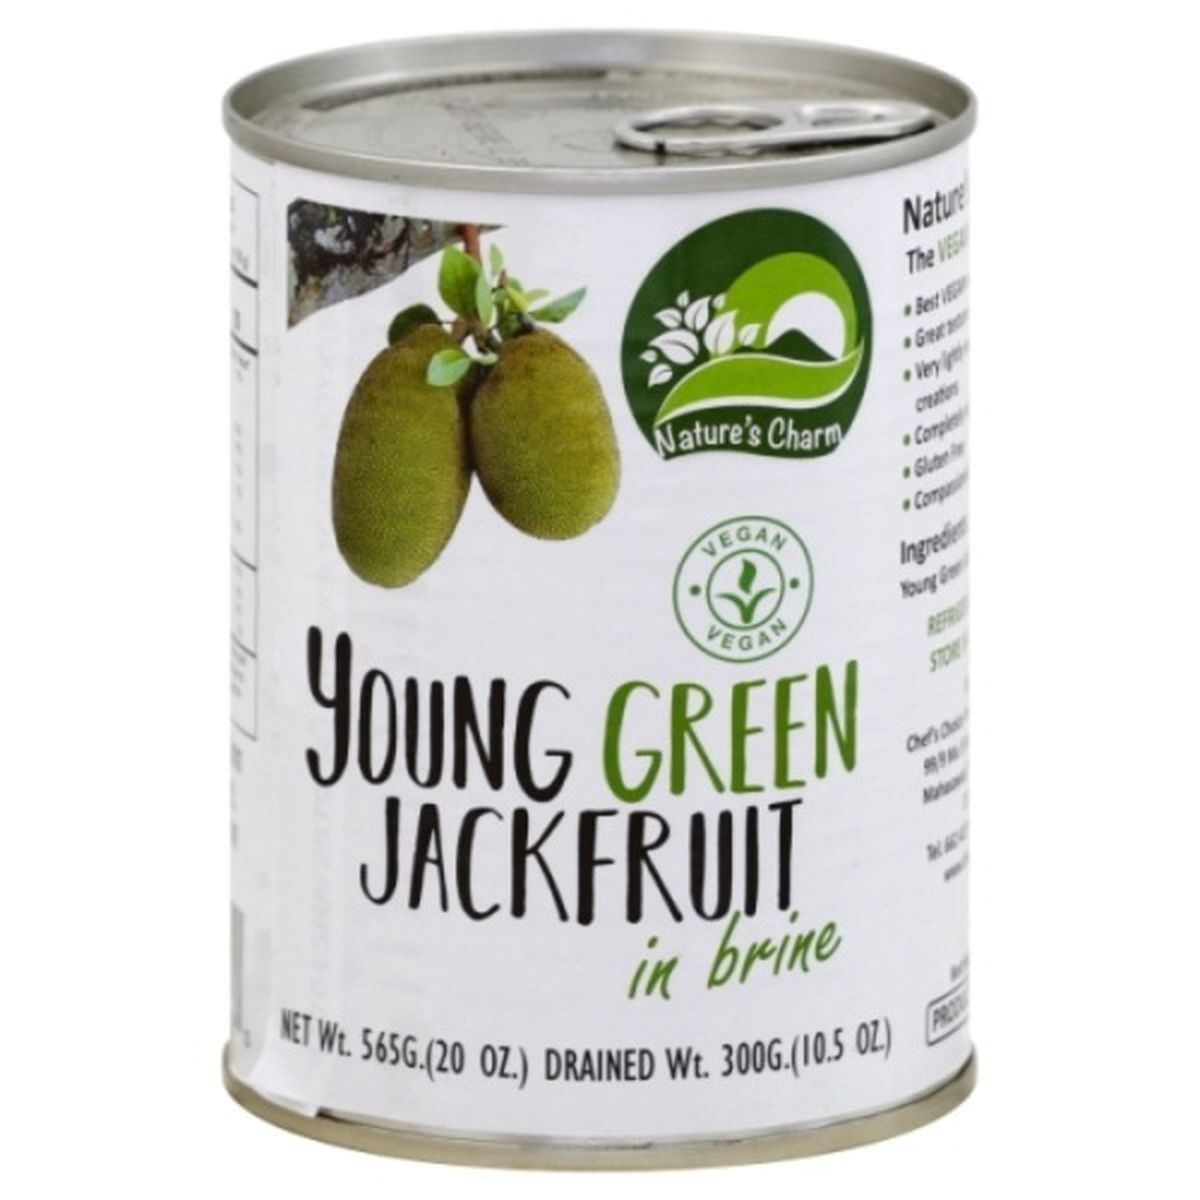 Calories in Nature's Charm Jackfruit, Young Green, in Brine